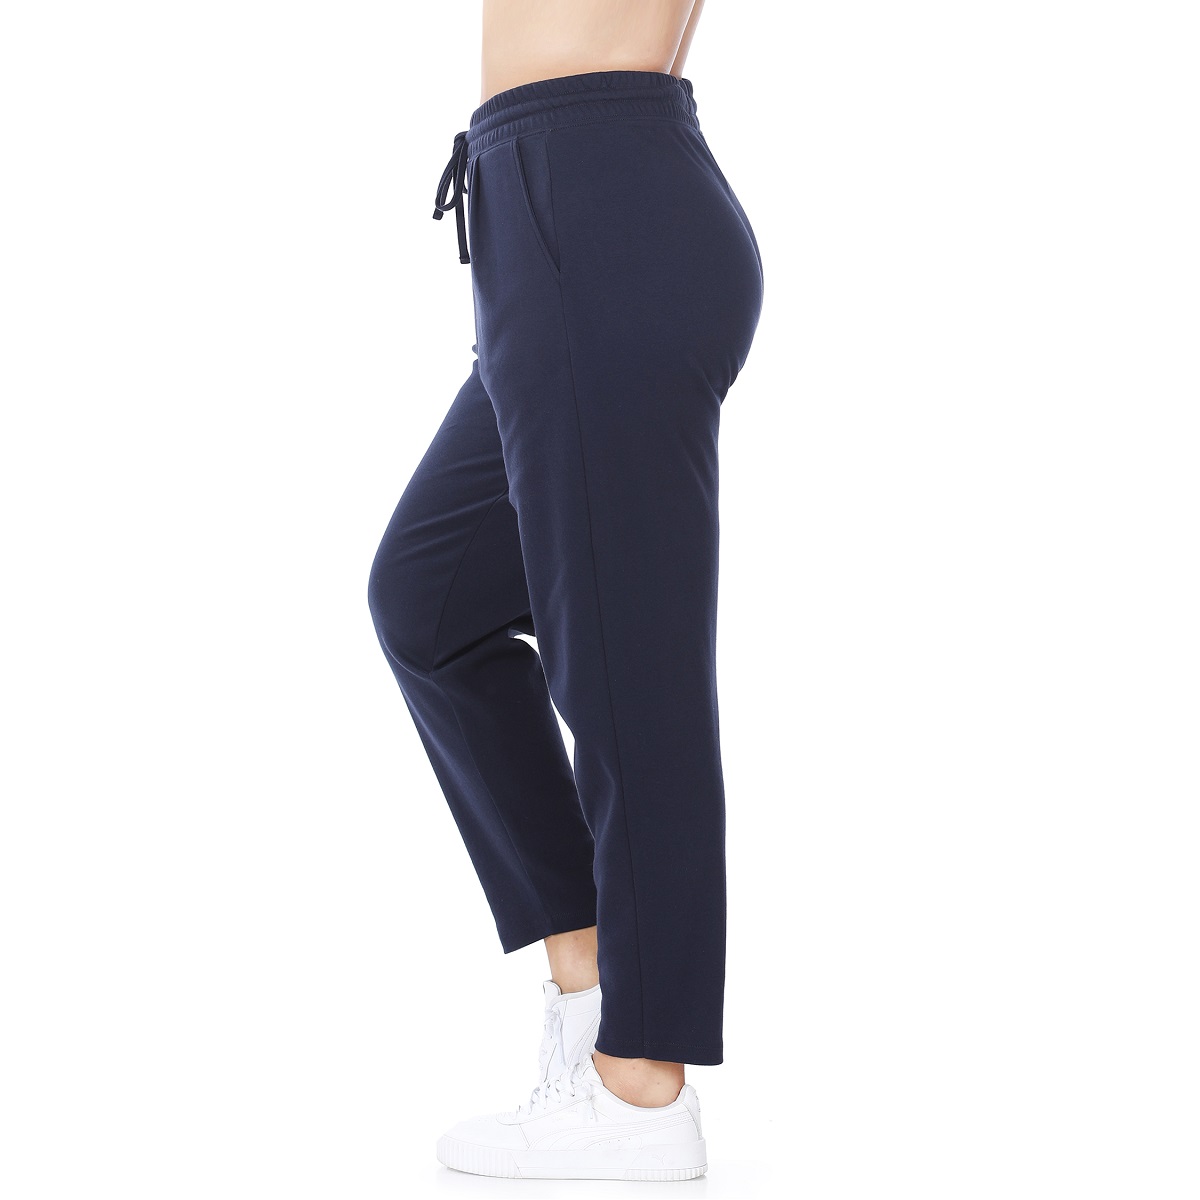 Women's Joggers Sweatpants Workout Pants with pockets,  Elastic Waistband with Draw String, Relaxed Fit